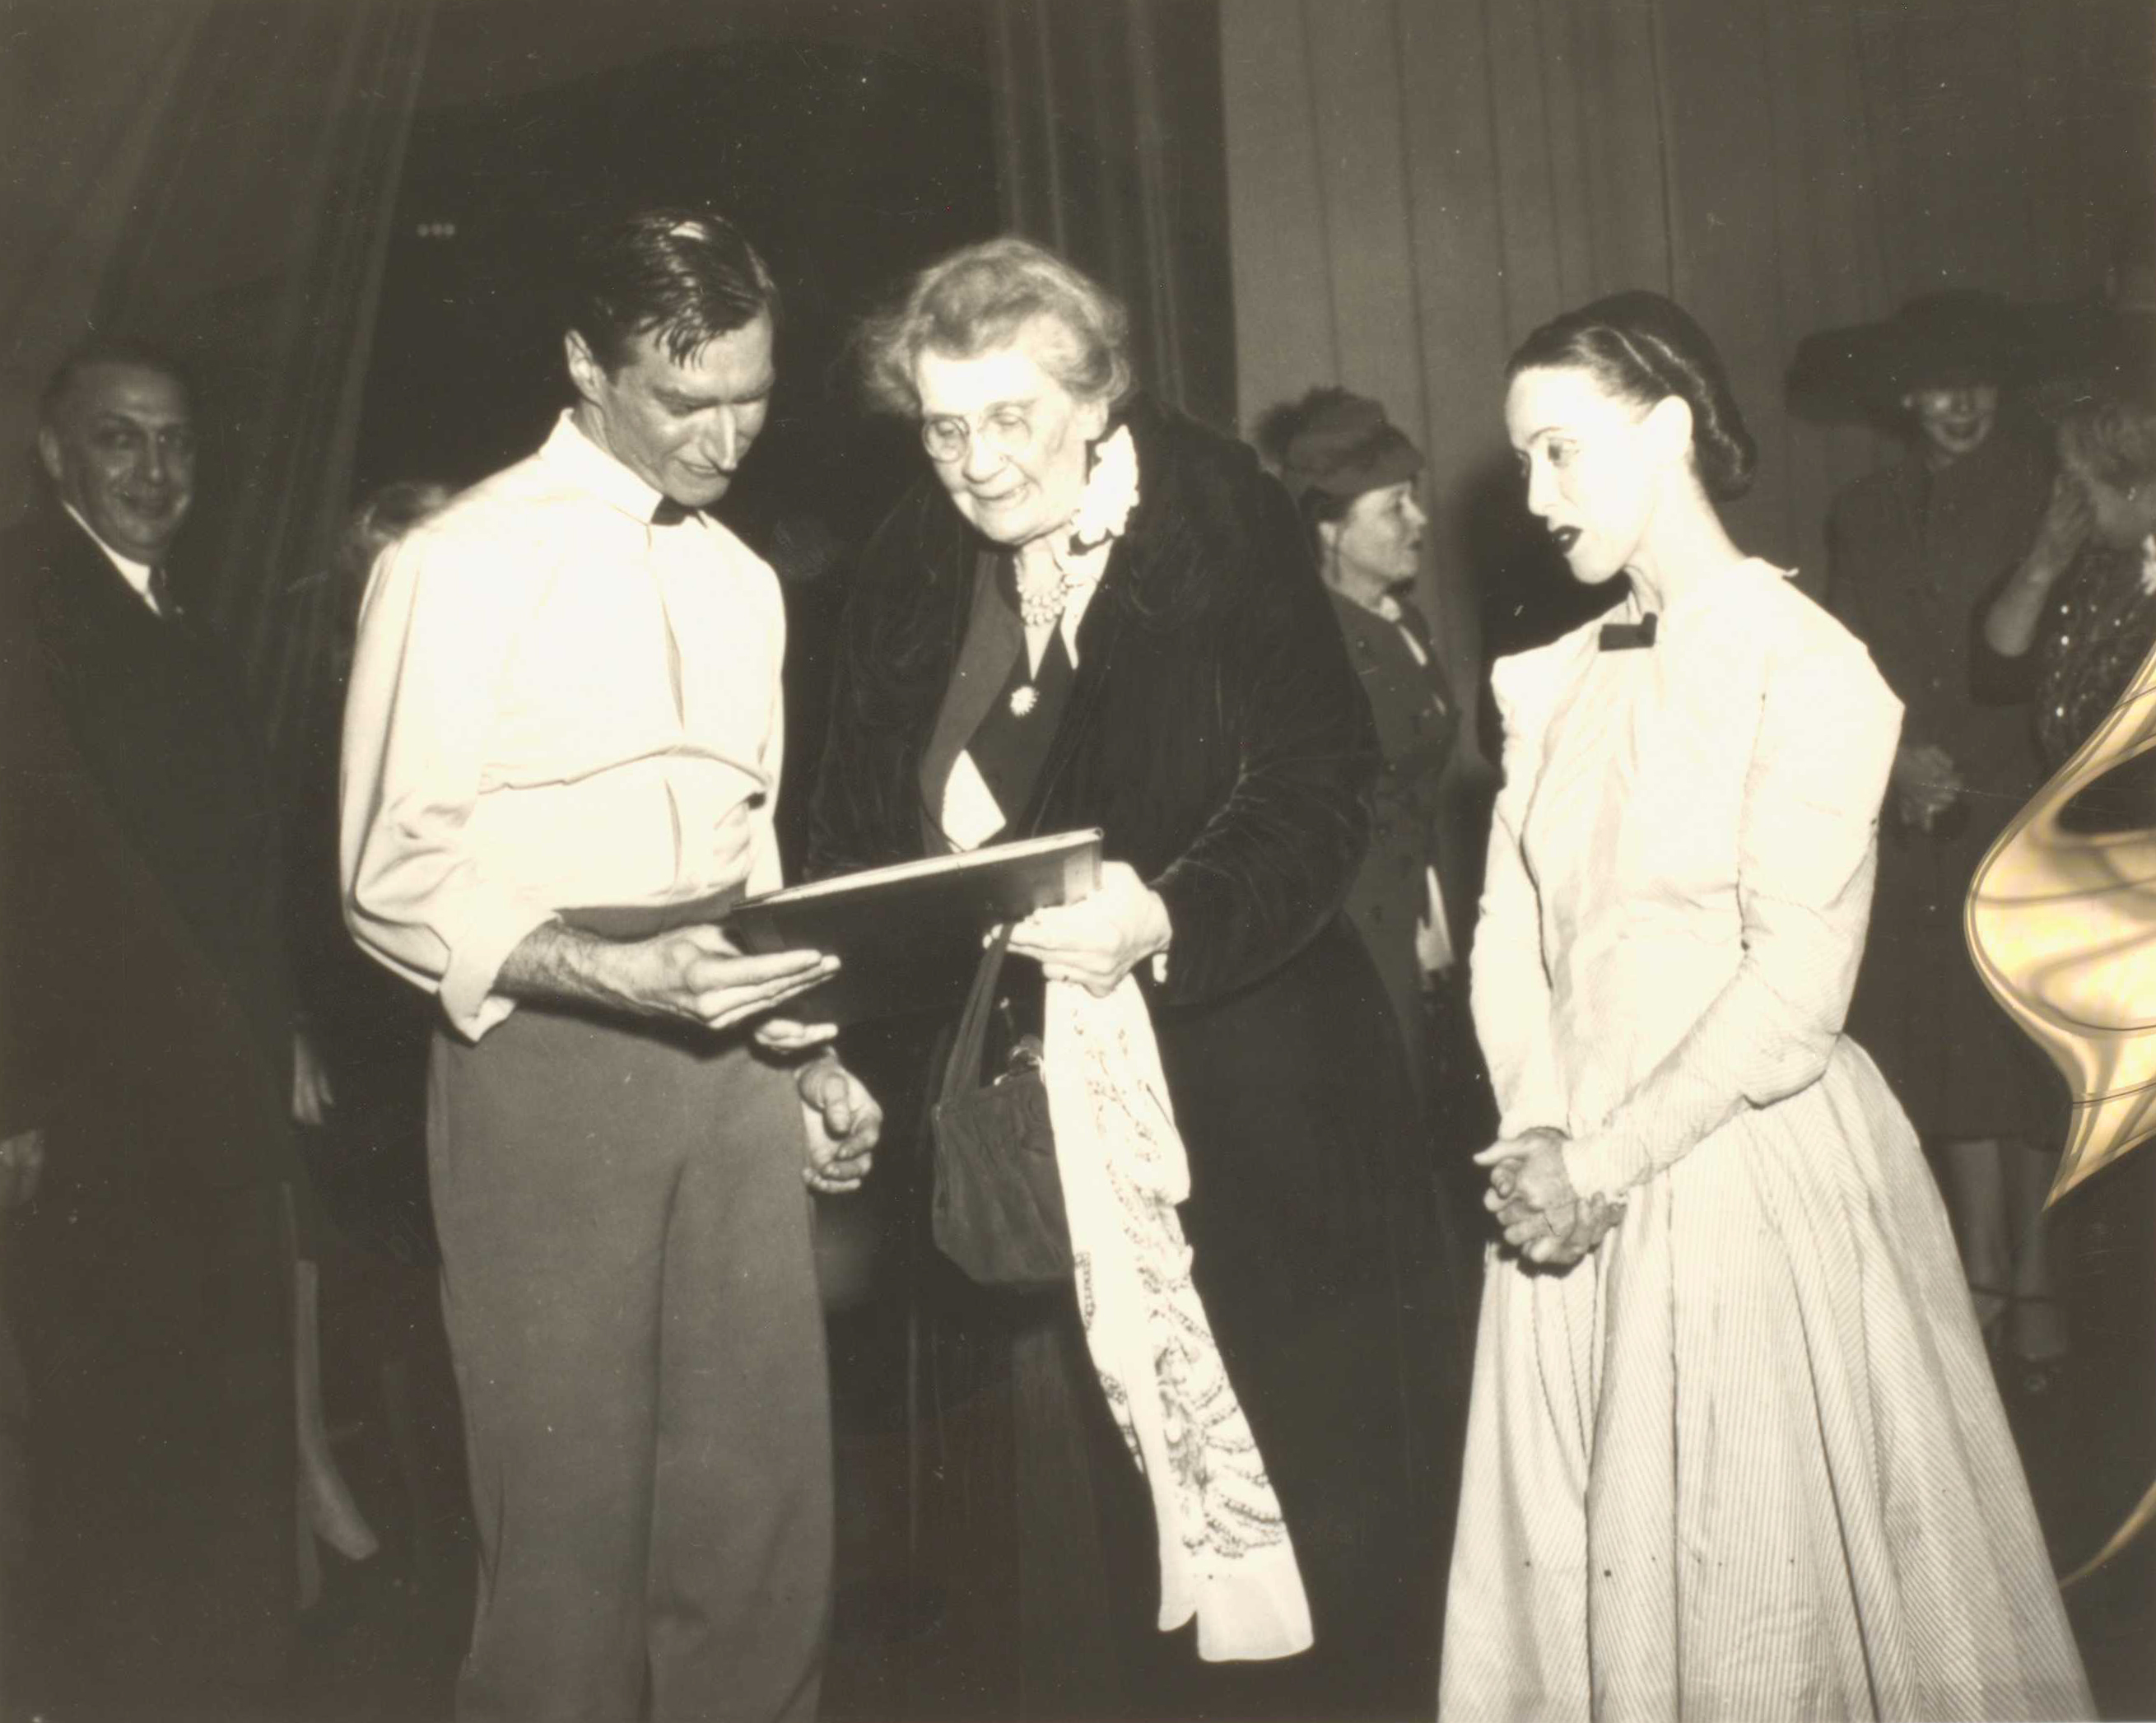 Elizabeth Sprague Coolidge, Erick Hawkins, and Martha Graham at the premiere of “Appalachian Spring,” 1944. Coolidge Foundation Collection, Music Division, Library of Congress.